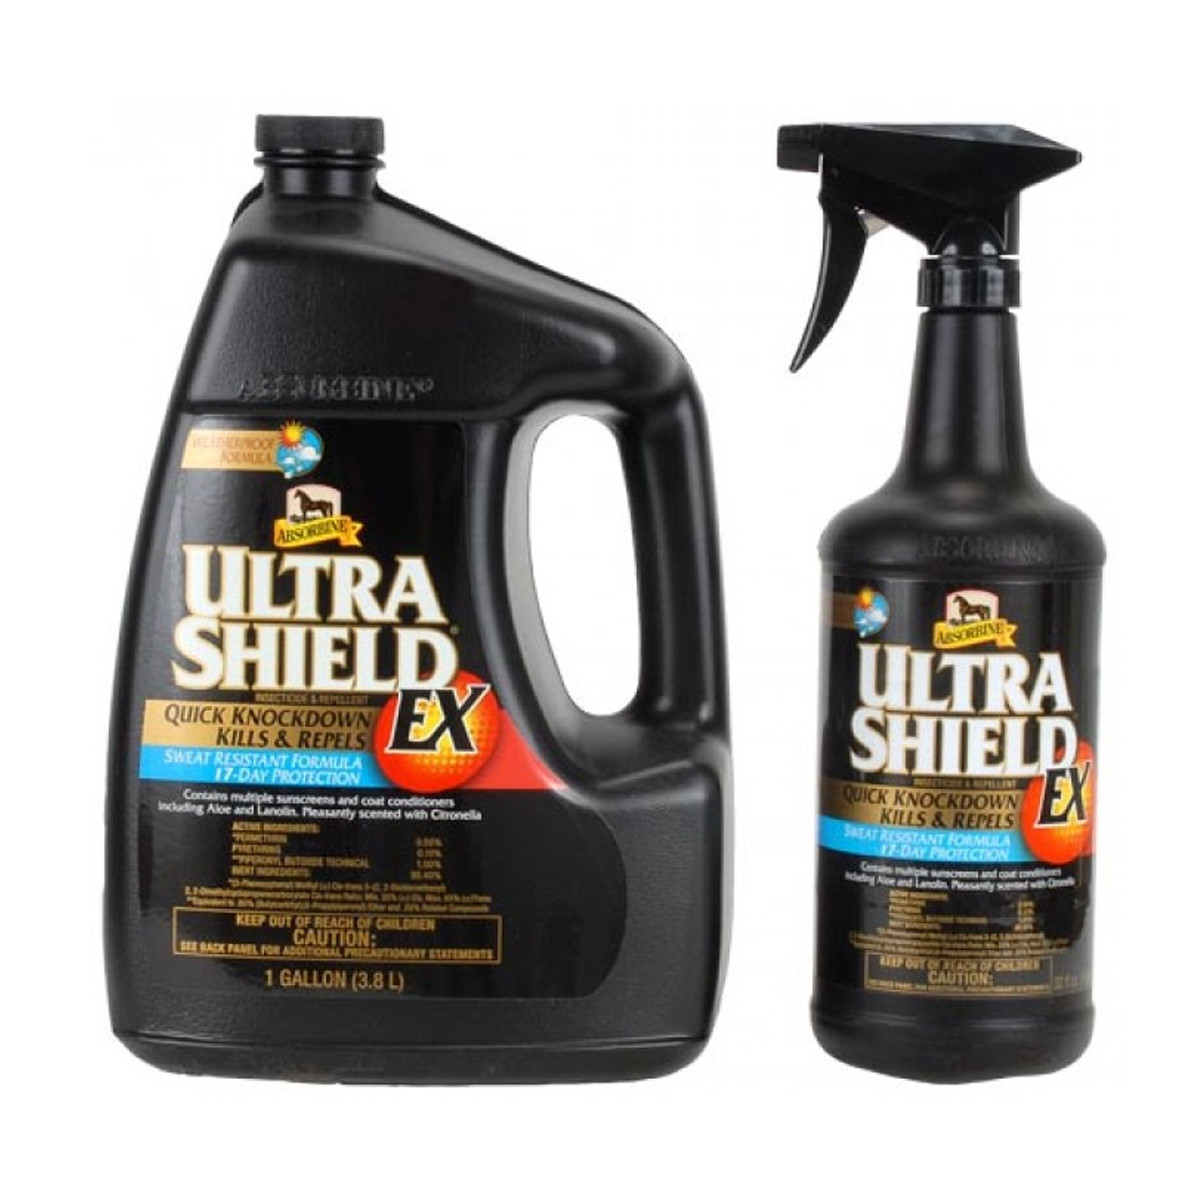 Ultra Shield Ex Insecticide and Repellent - 946 ml